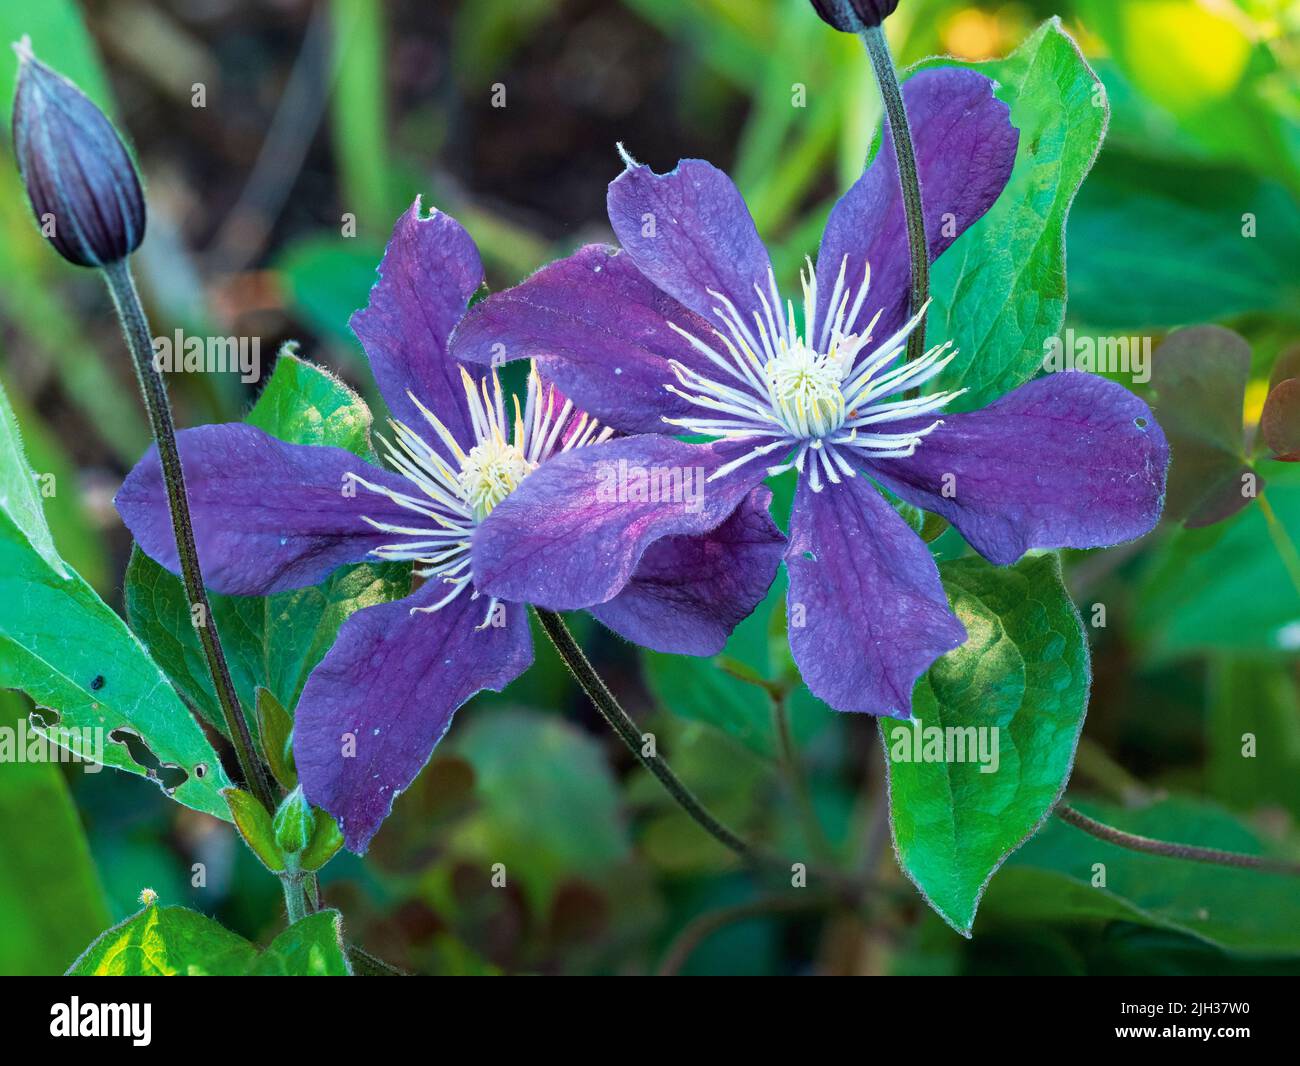 Blue-nauve flowers of the compact scrambling herbaceous perennial clematis, lematis (Integrifolia group) 'Arabella' Stock Photo